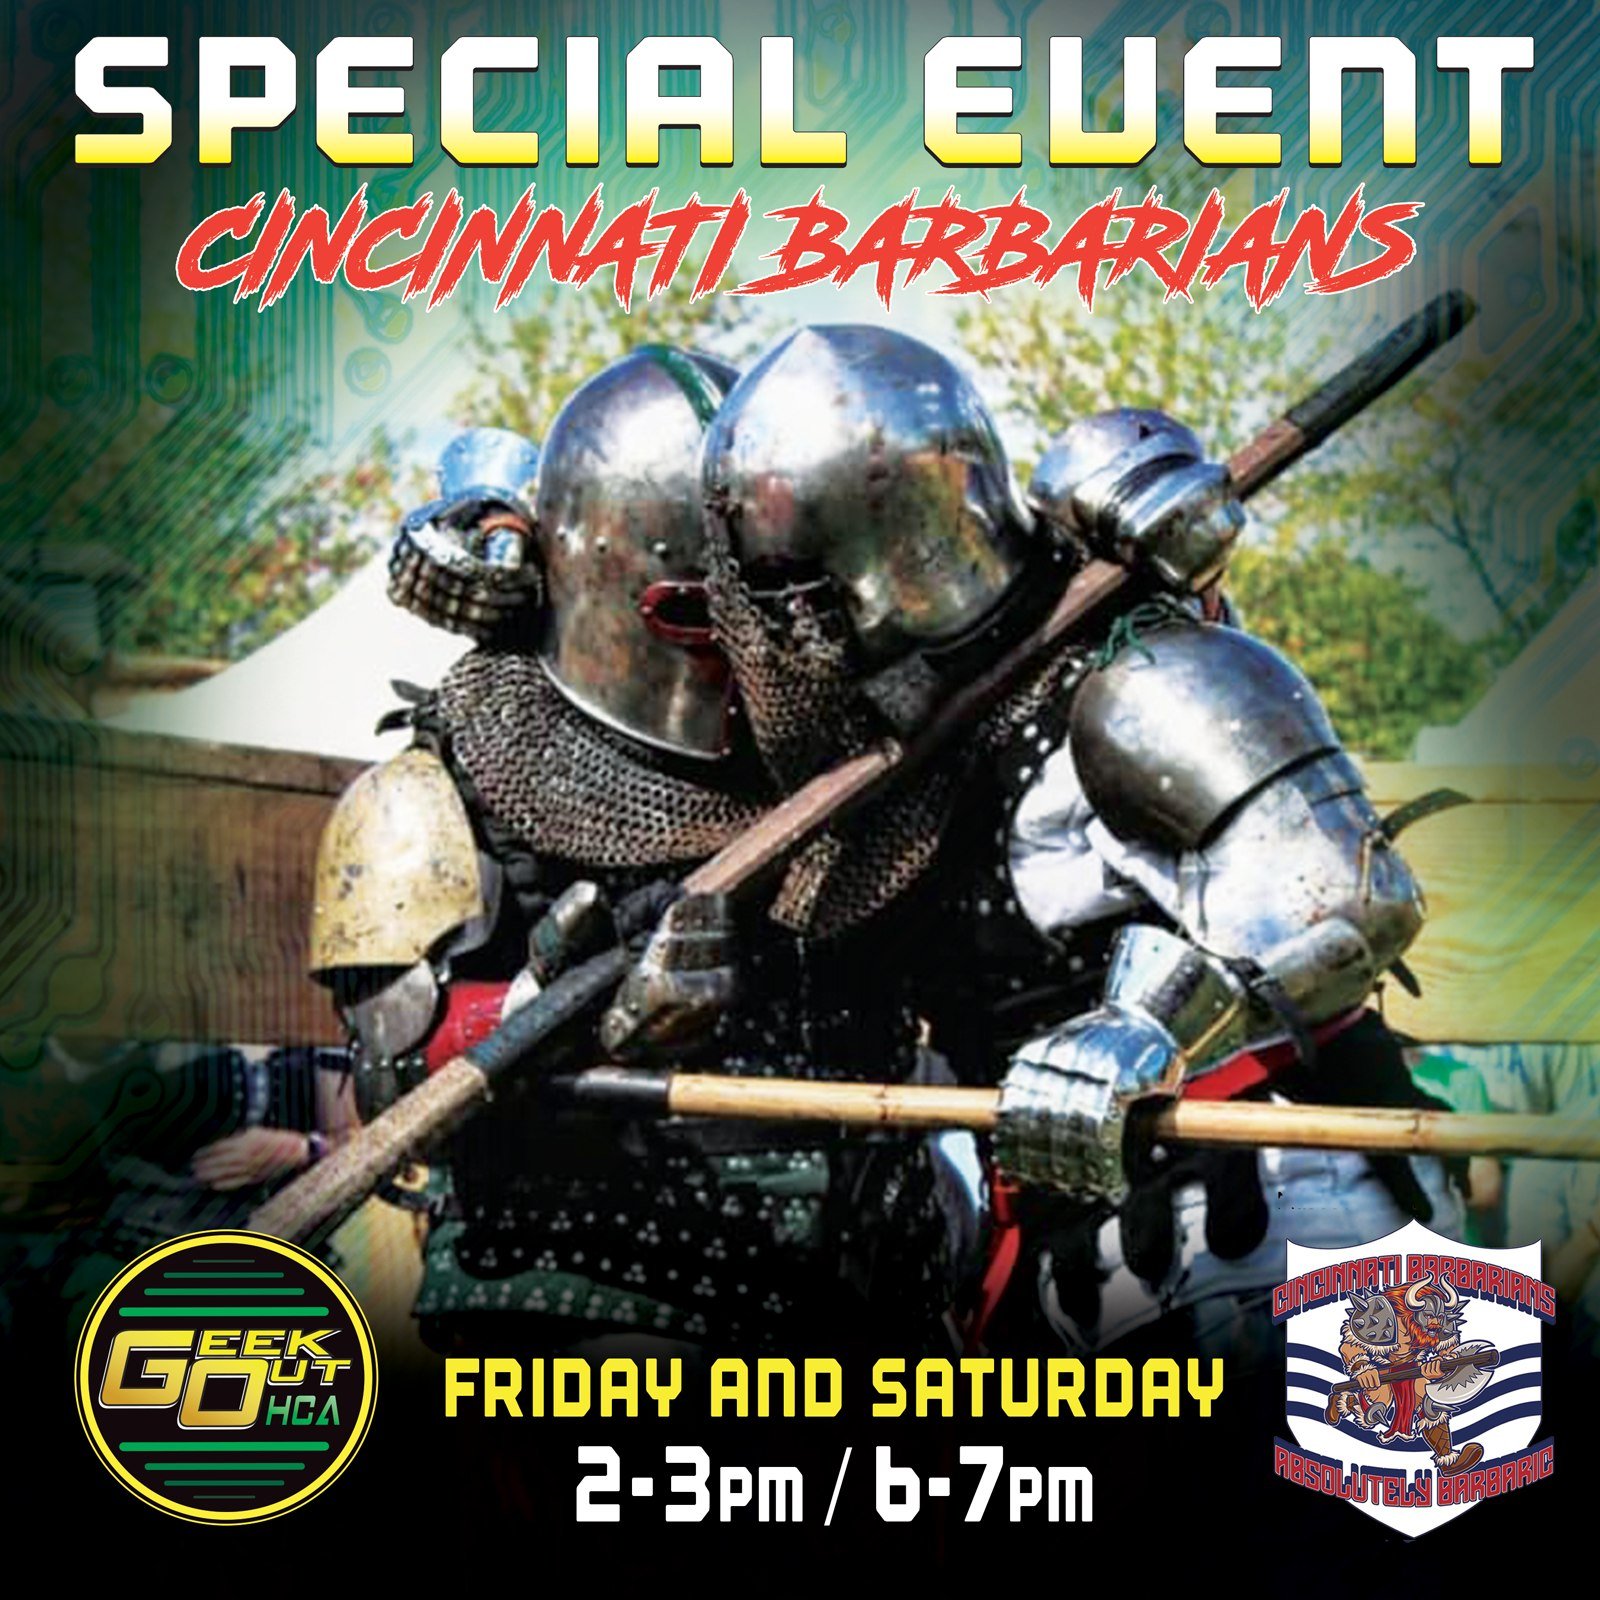   SPECIAL EVENT ANNOUNCEMENT    Cincinnati Barbarians, Cincinnati's original Armored Combat Team, will be marching out to rage and demonstrate their battle prowess for us! Come see these fearless combatants duke it out in the upper campground on Frid